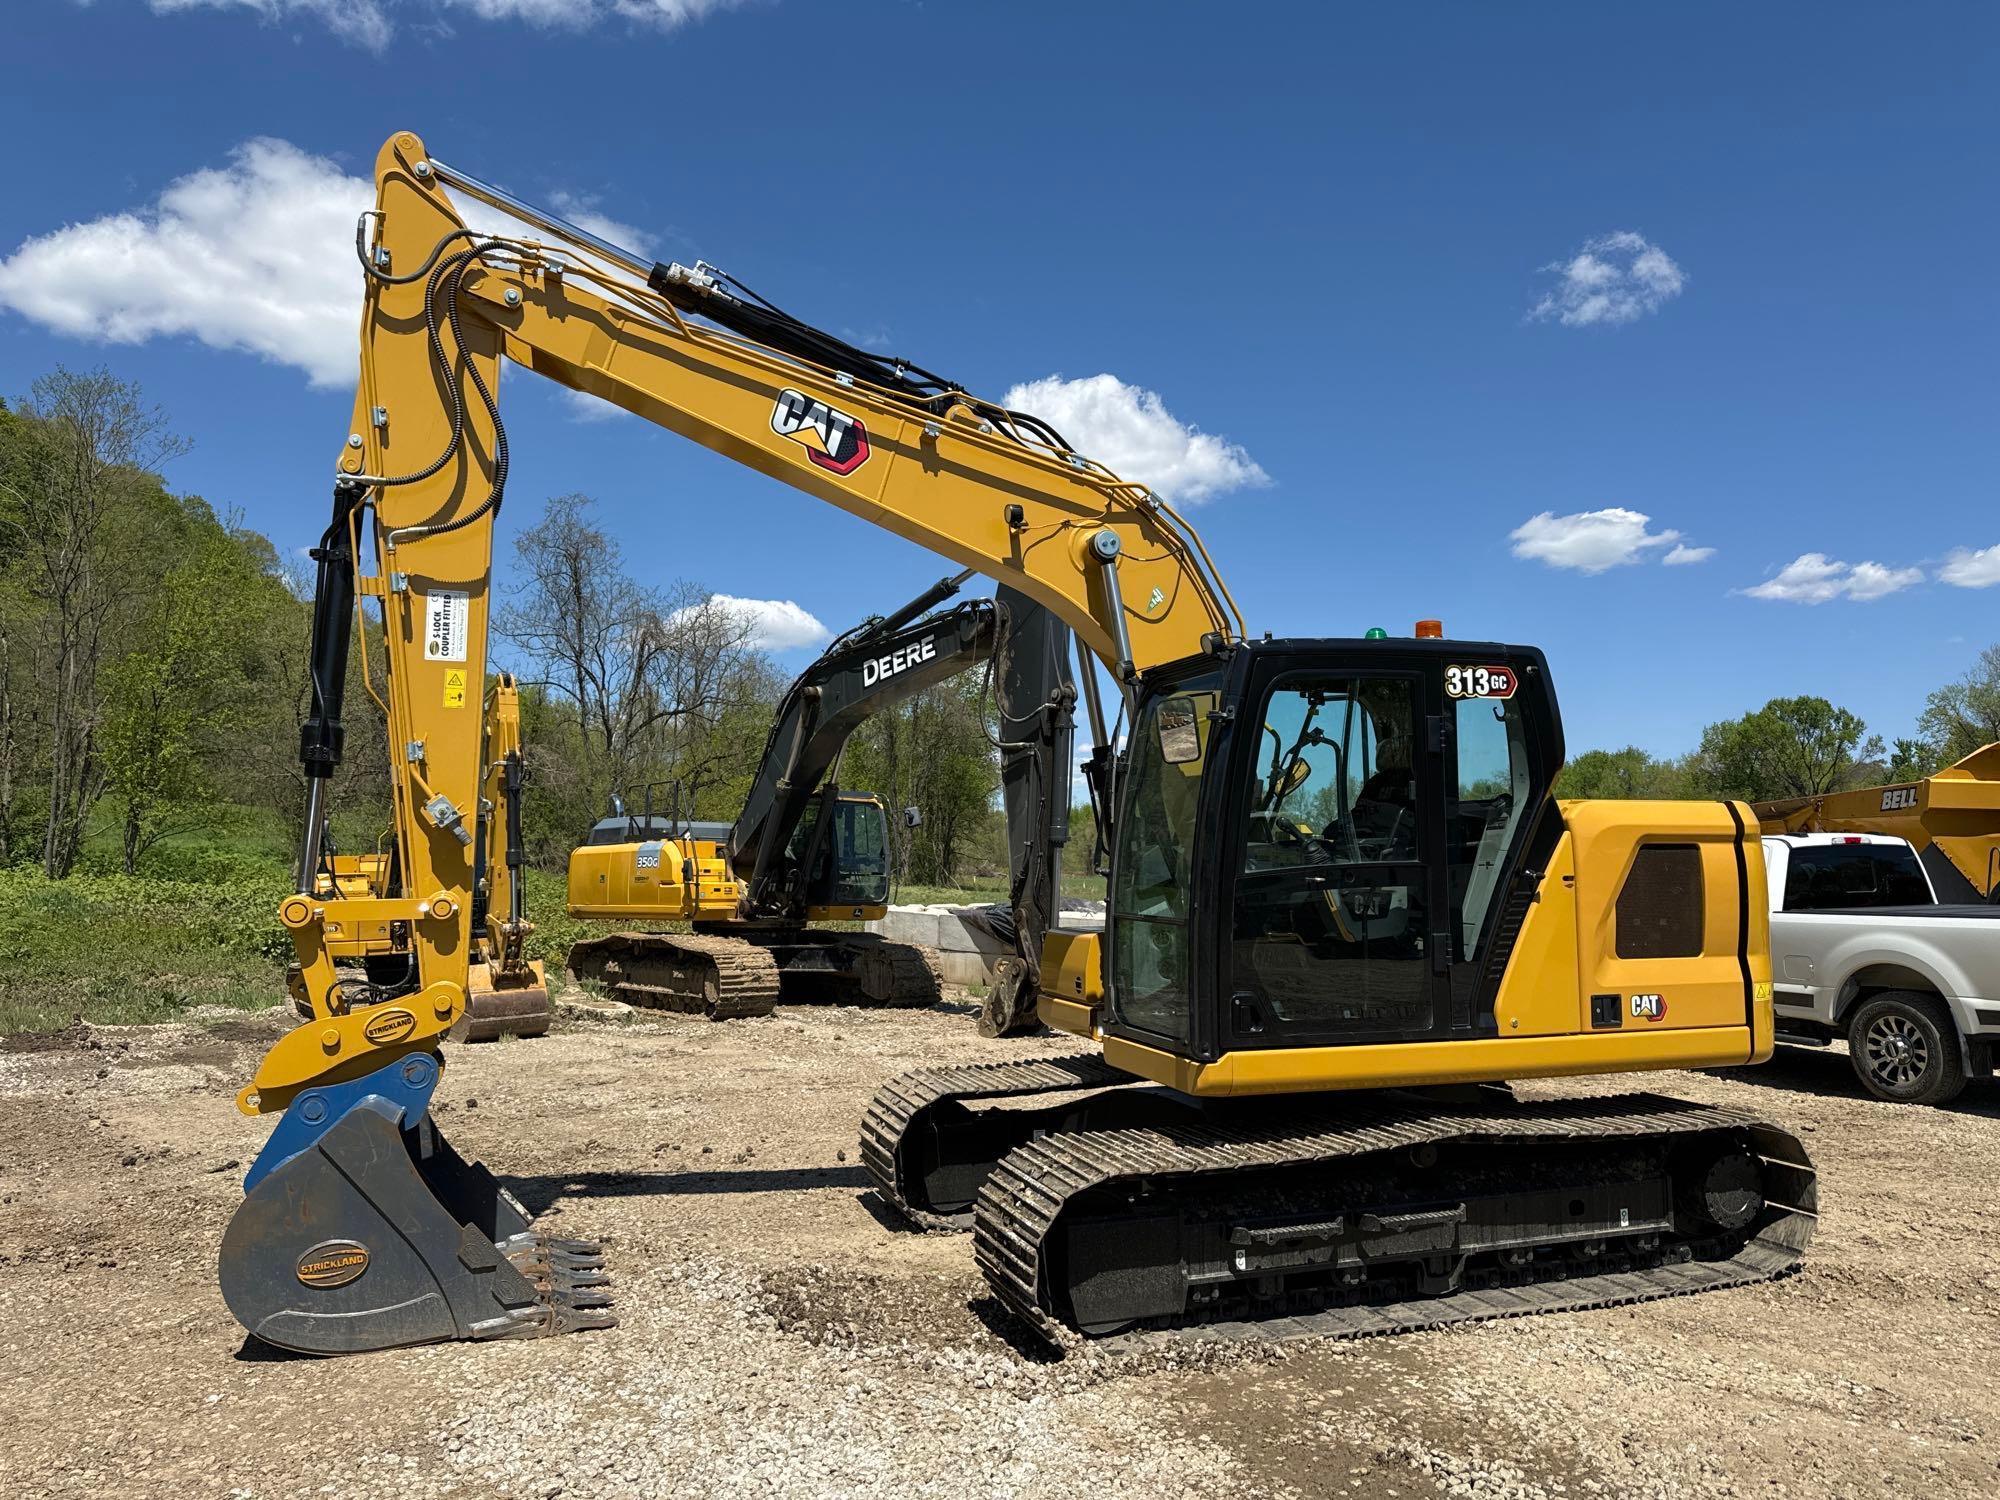 2022 CAT 313GC HYDRAULIC EXCAVATOR SN-B20009, powered by Cat diesel engine, equipped with Cab, air,